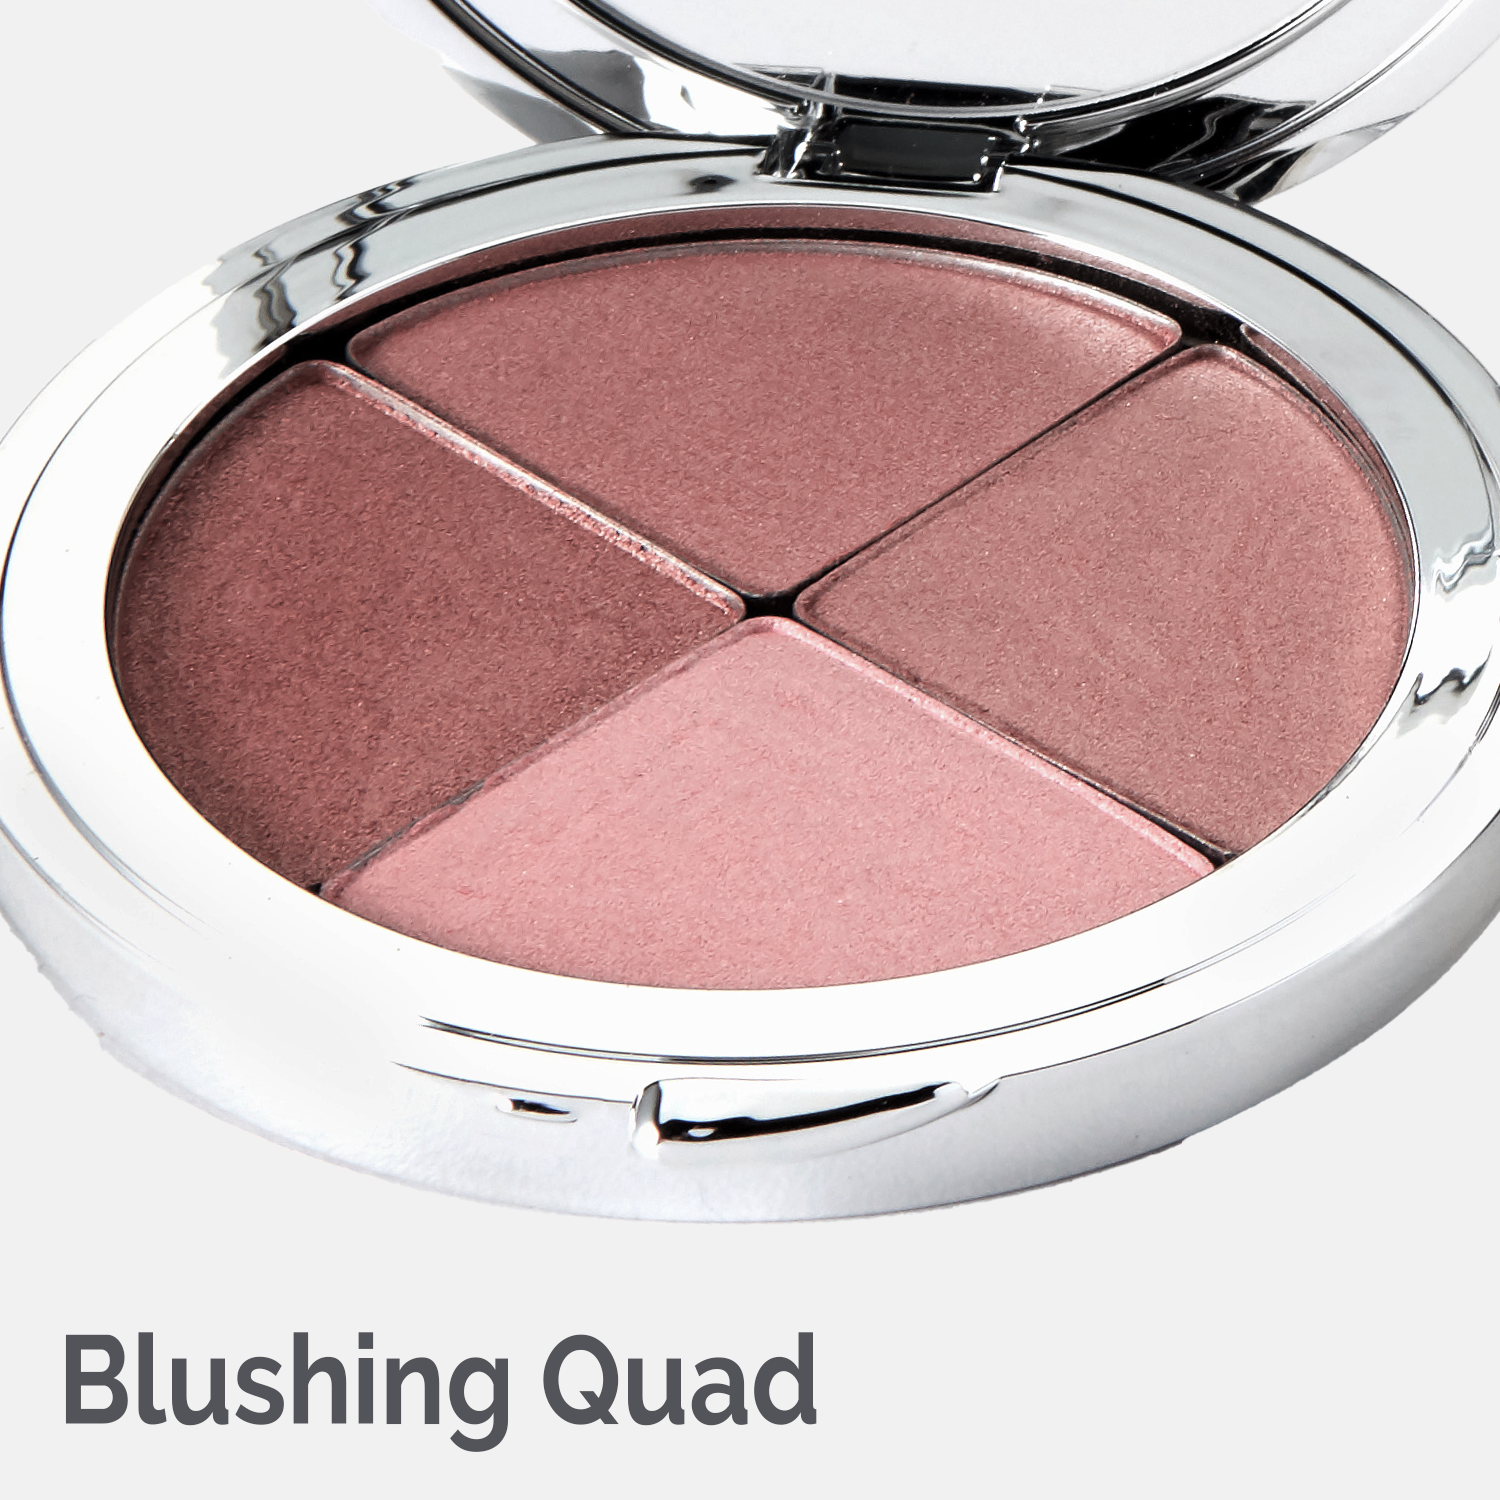 4 shades of mineral makeup to bring out pink undertones #blushing